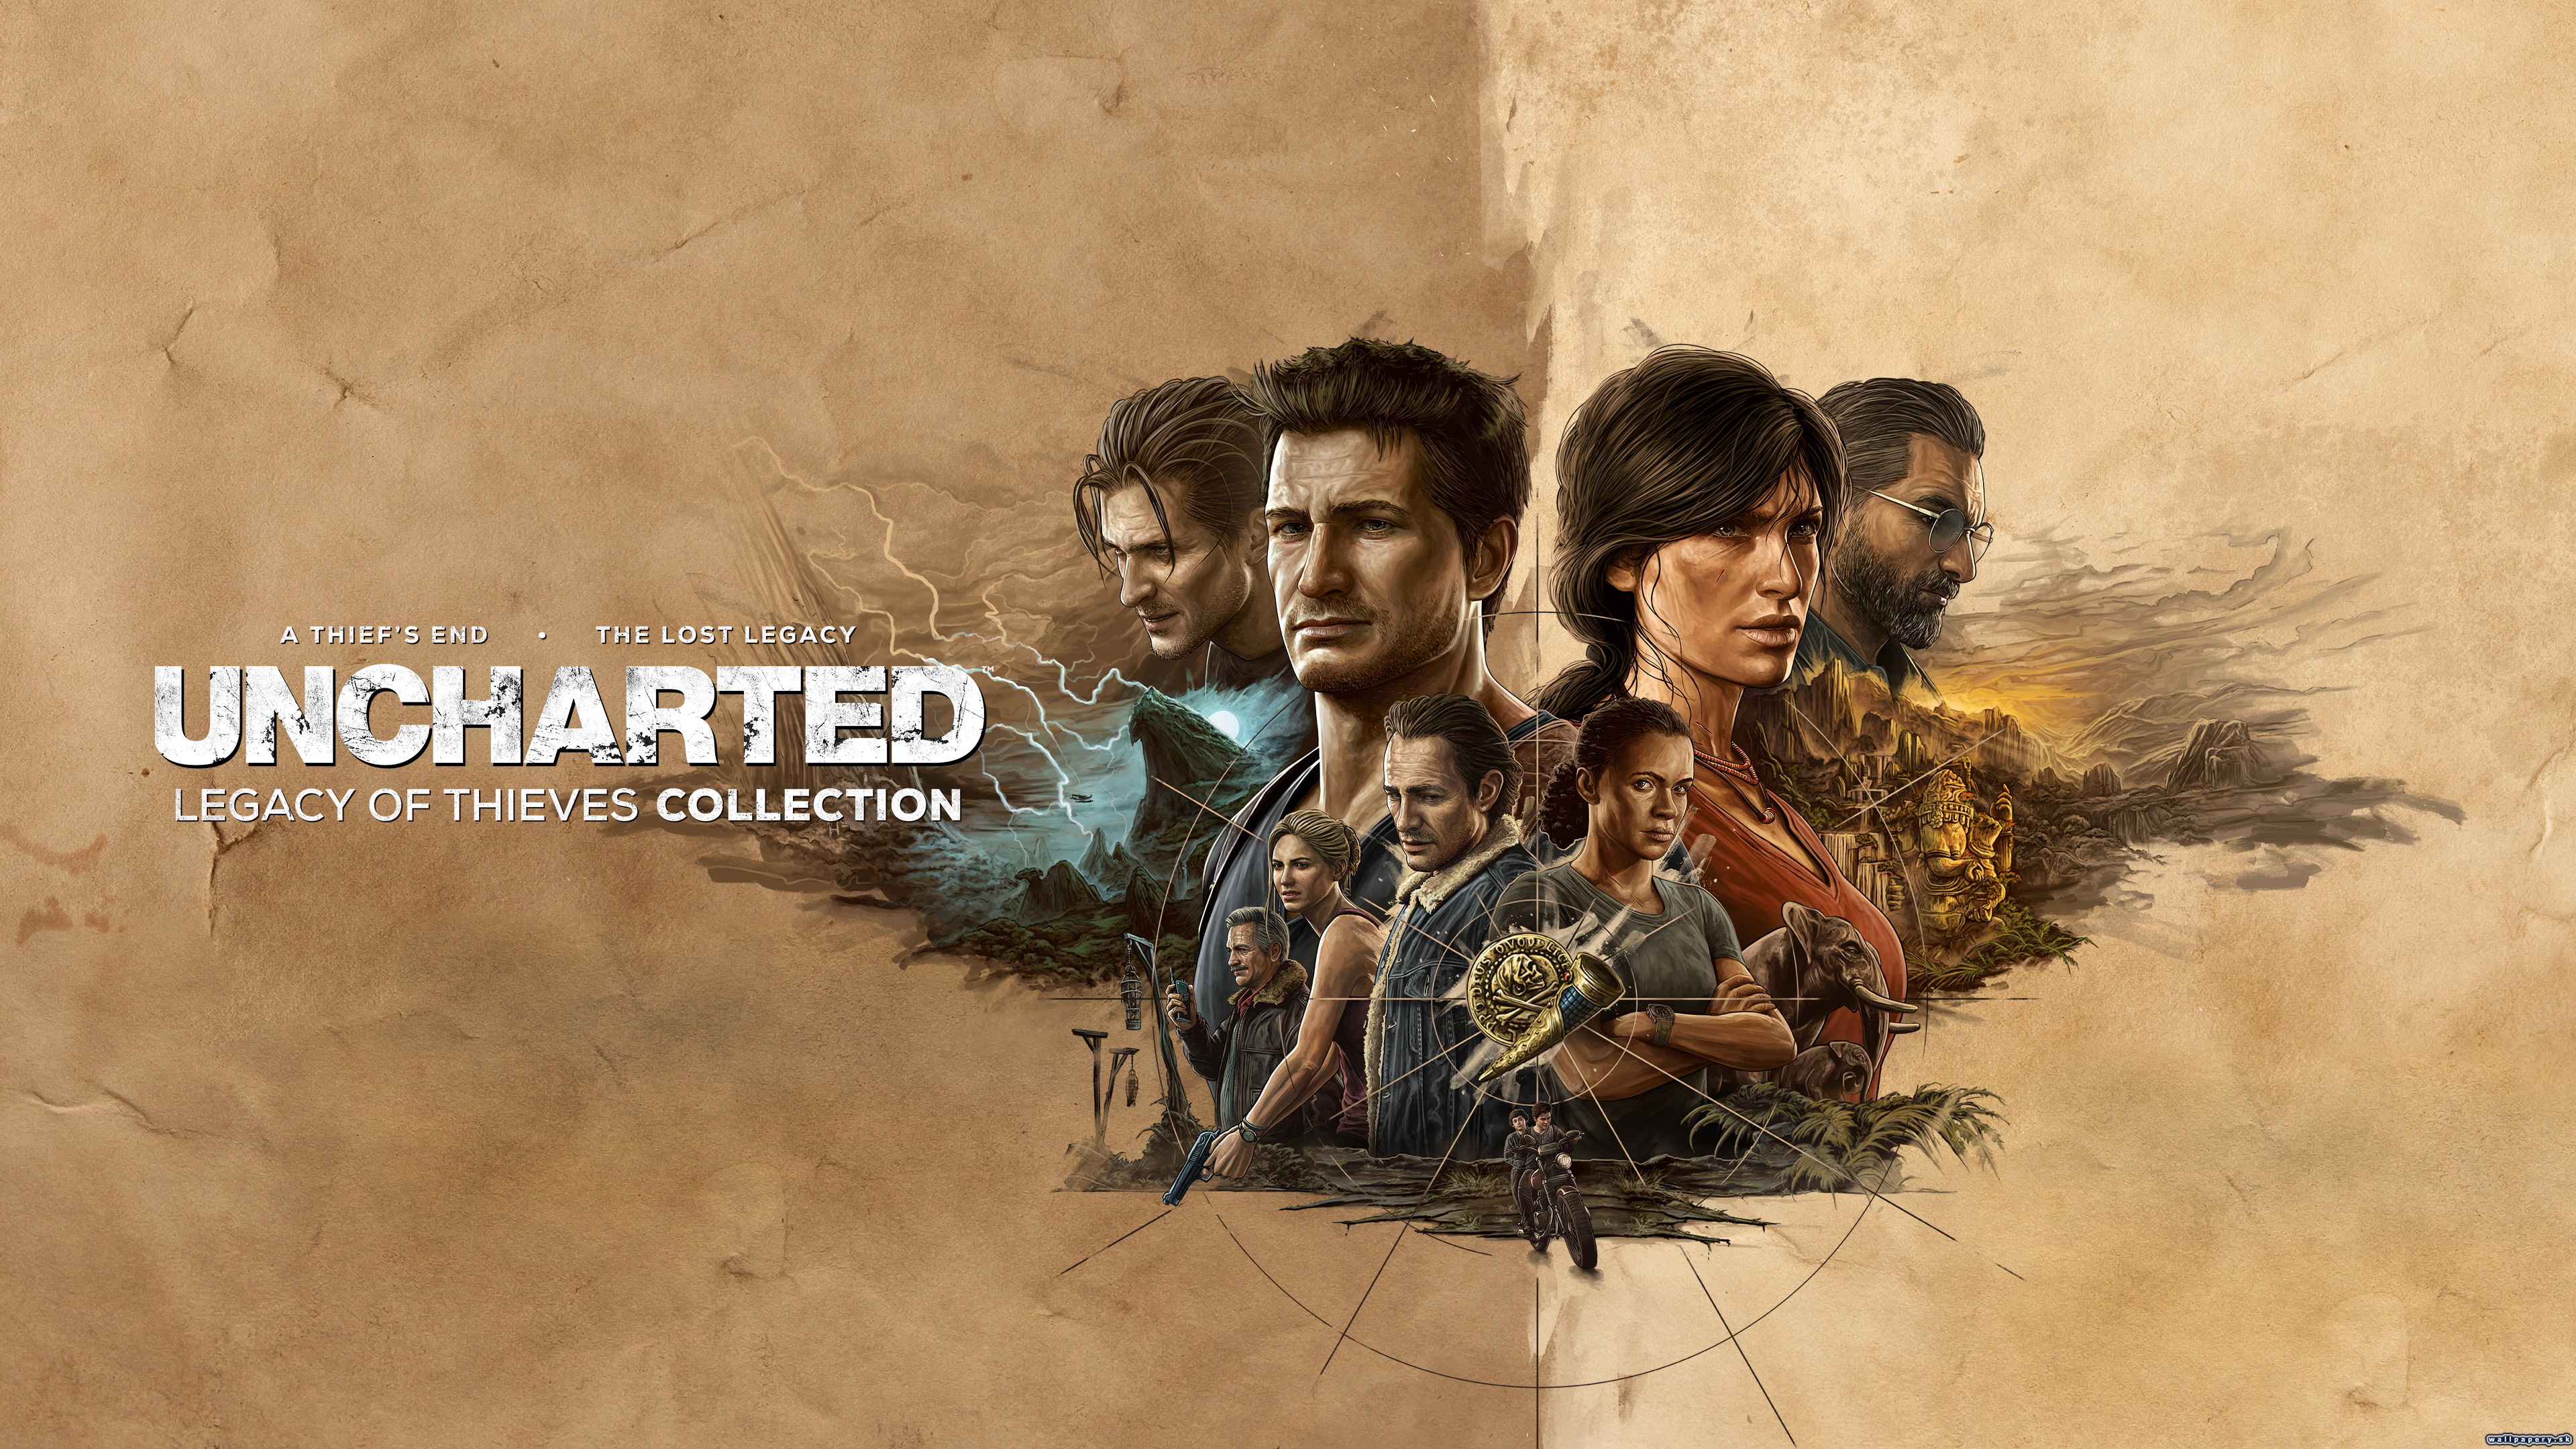 Uncharted: Legacy of Thieves Collection - wallpaper 1